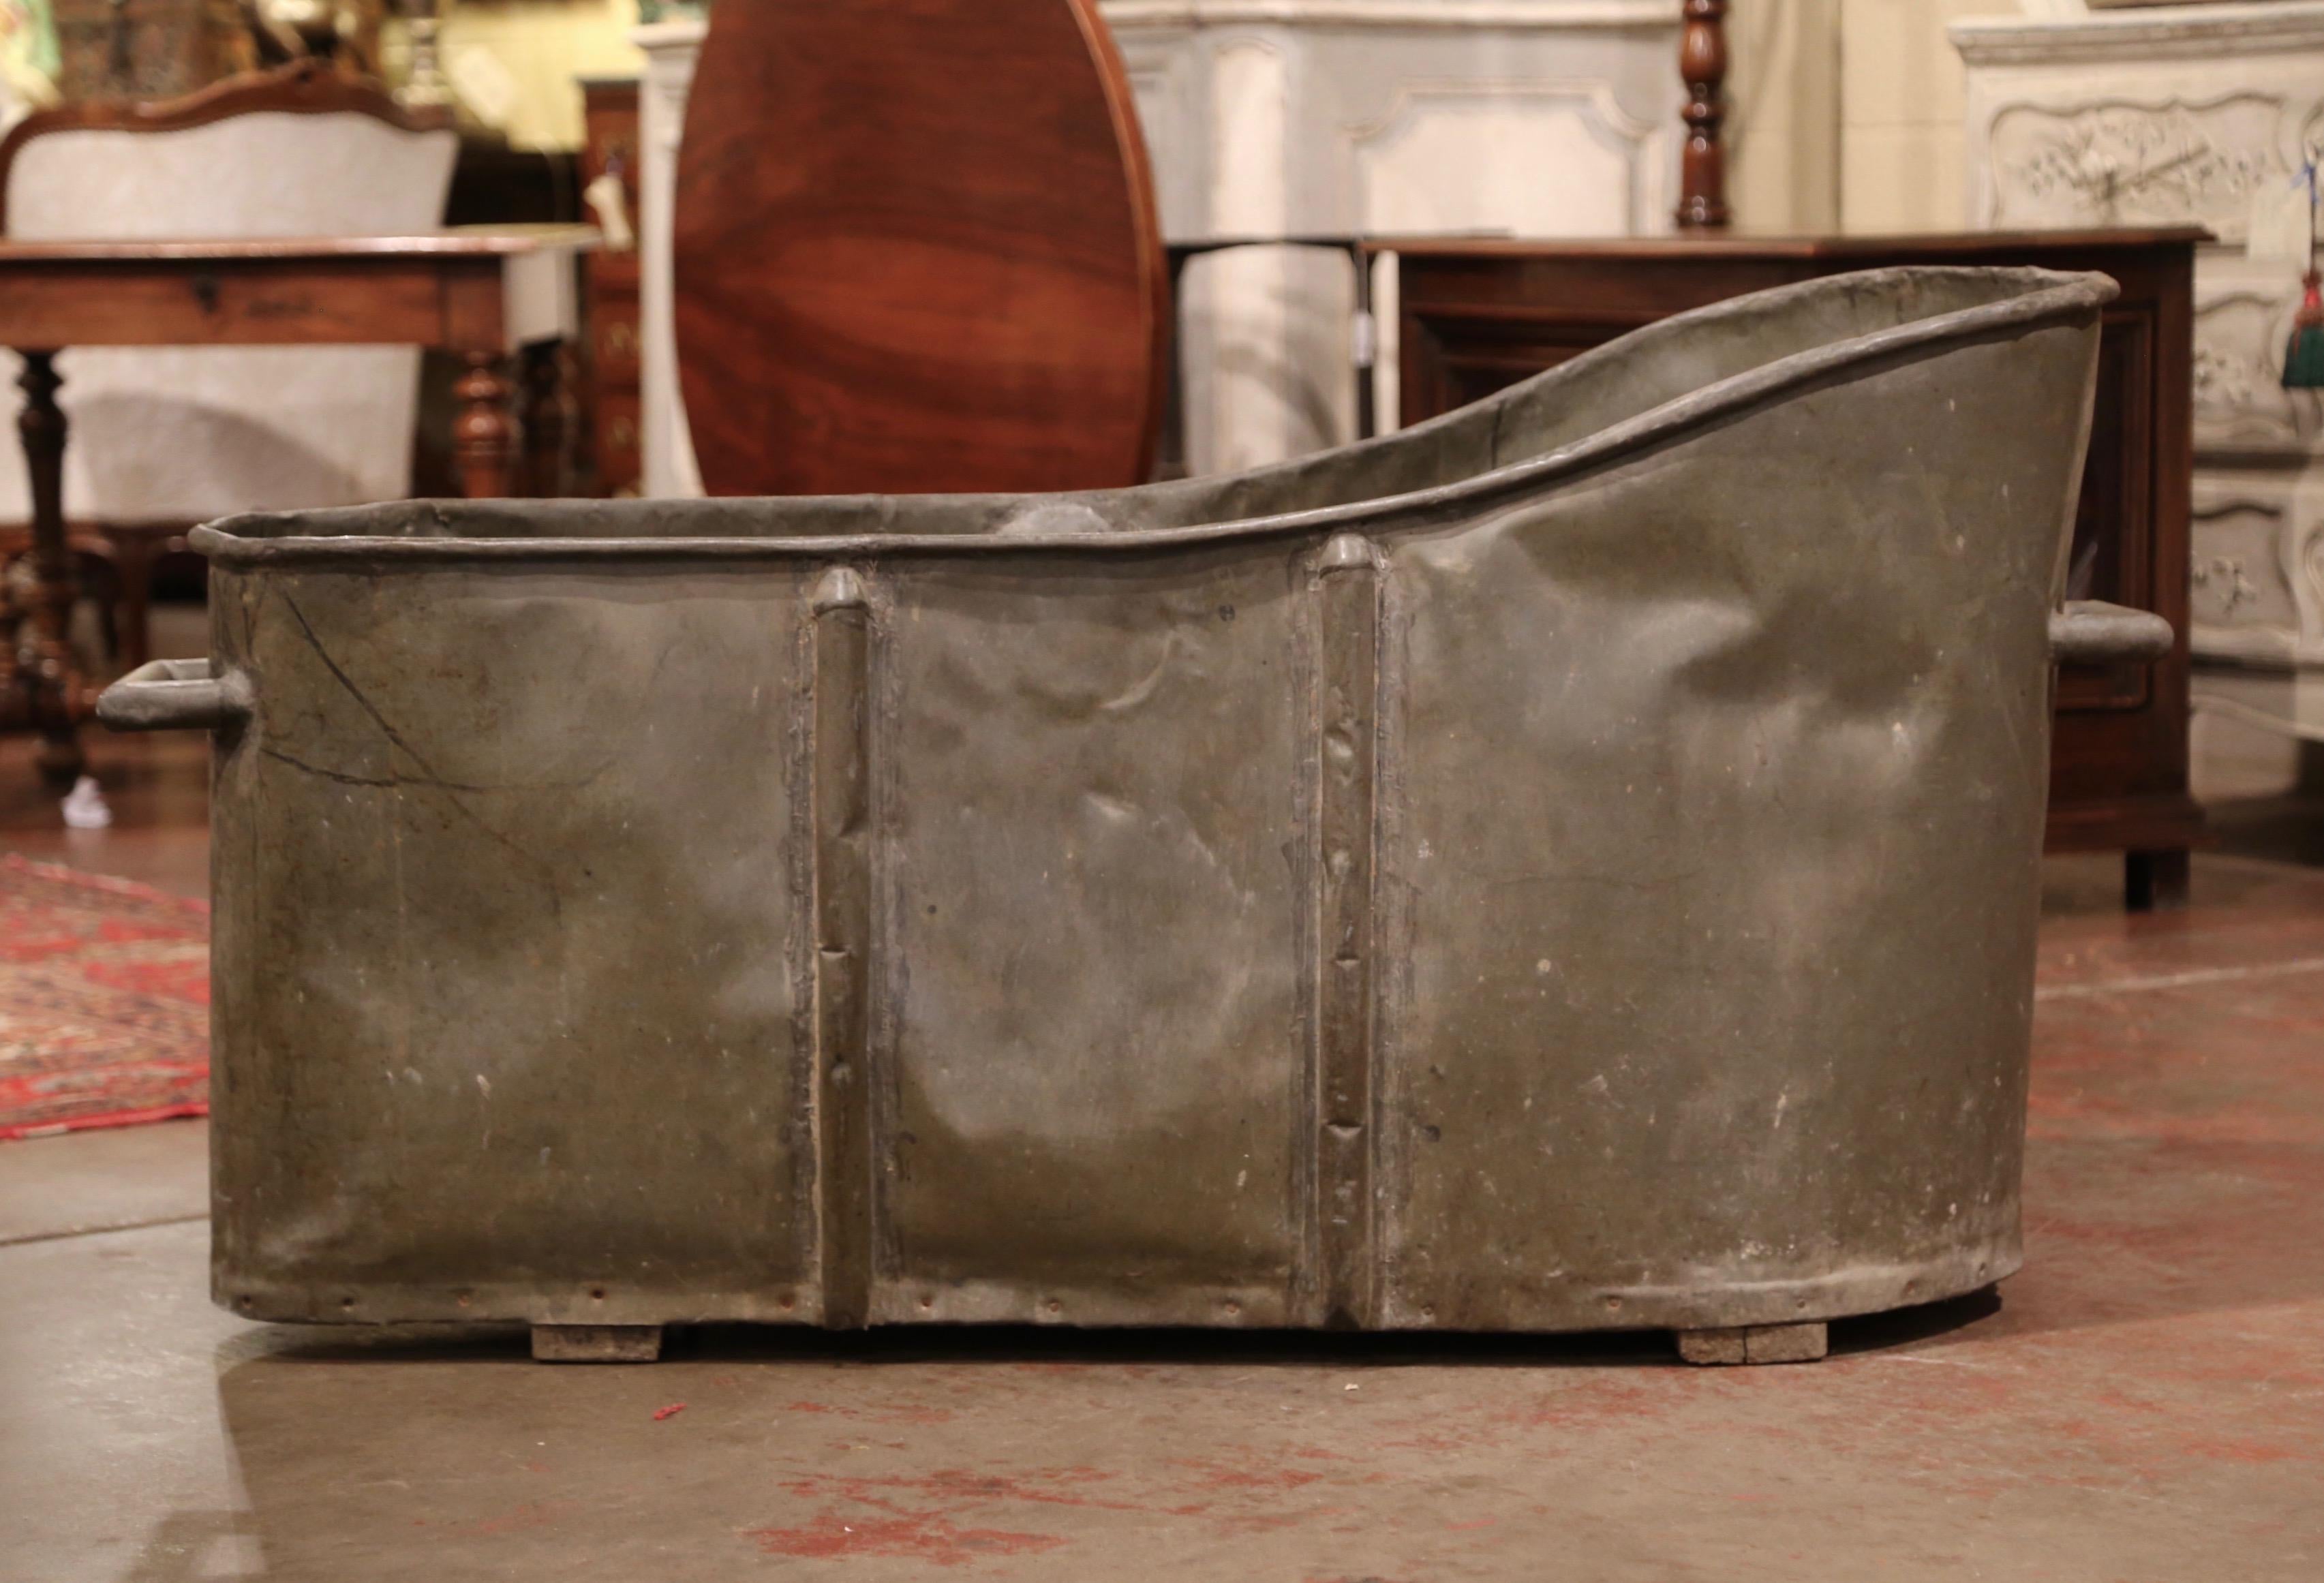 Use this decorative antique tub as a jardinière or a drink cooler! Crafted in France, circa 1880, and standing on a wood bottom, the oblong bathtub features a sturdy handle at one end and roll edges around the rim. The tub is in excellent condition